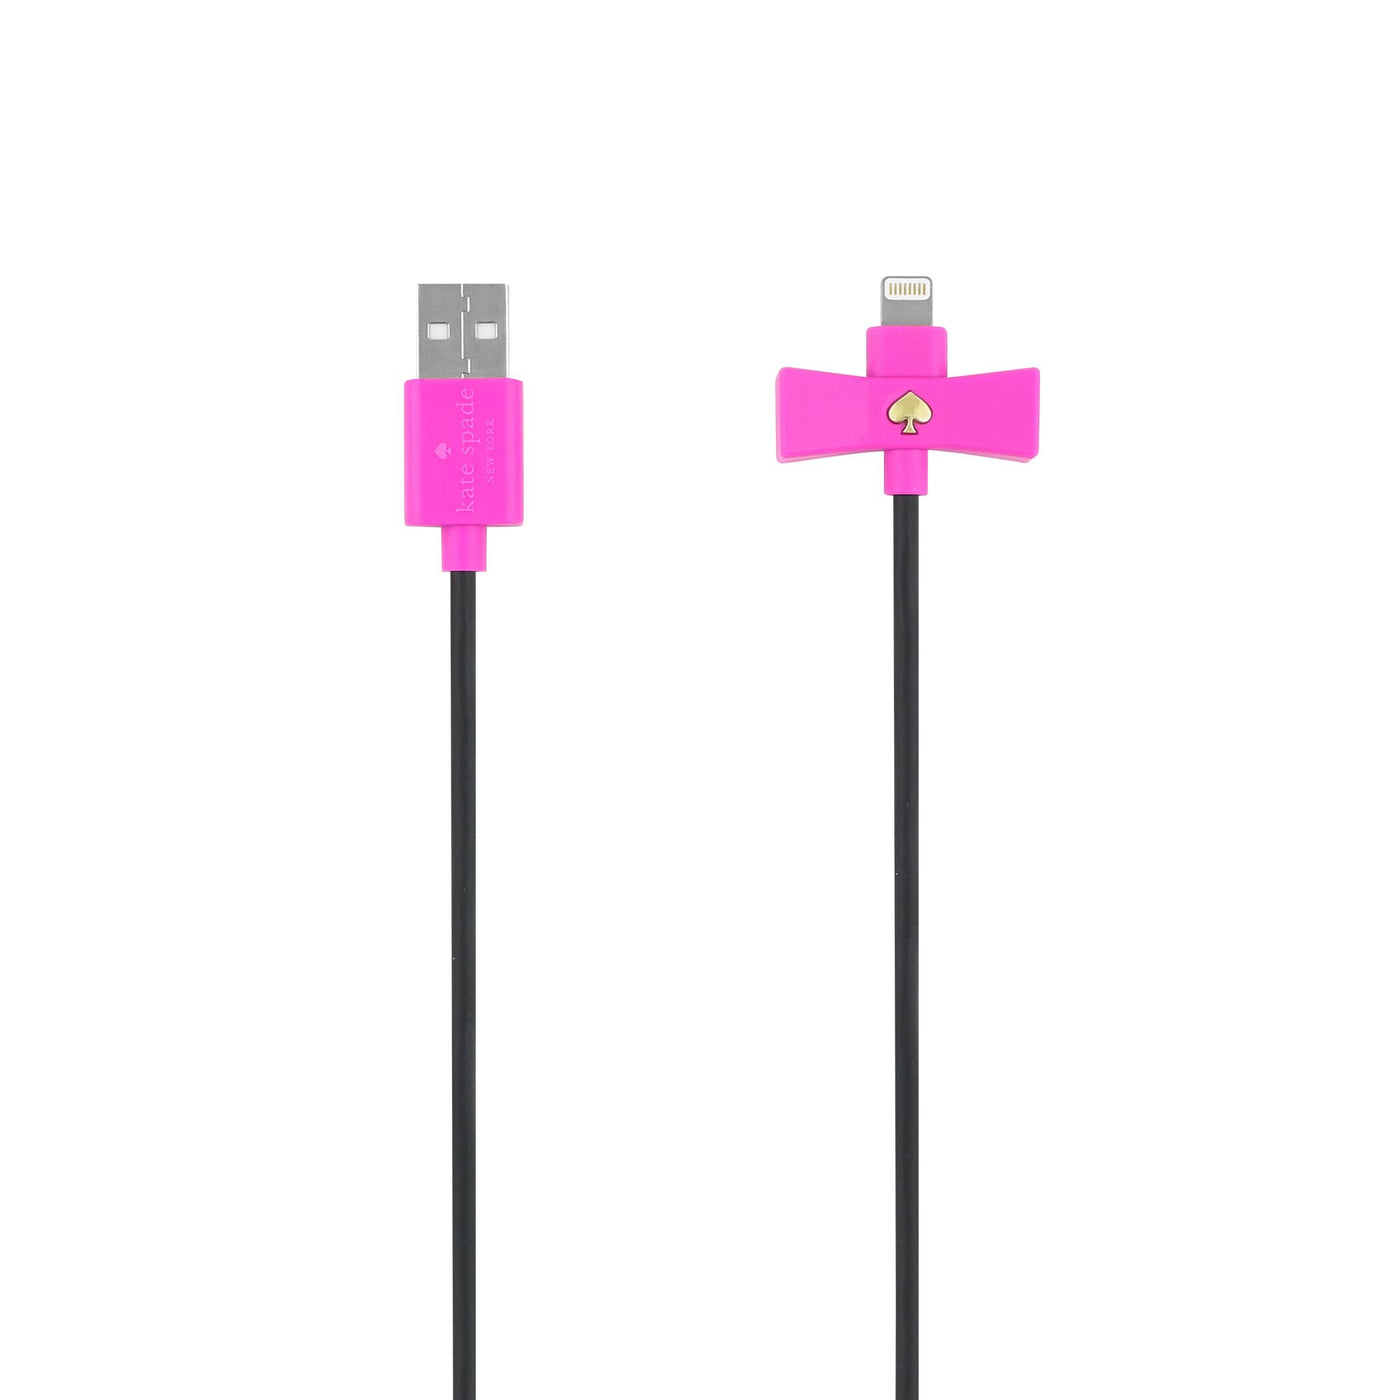 kate spade new york - Bow Charge/Sync Cable - Captive Lightning - Black Bow/Vivid Snapdragon Cable / ケーブル - FOX STORE